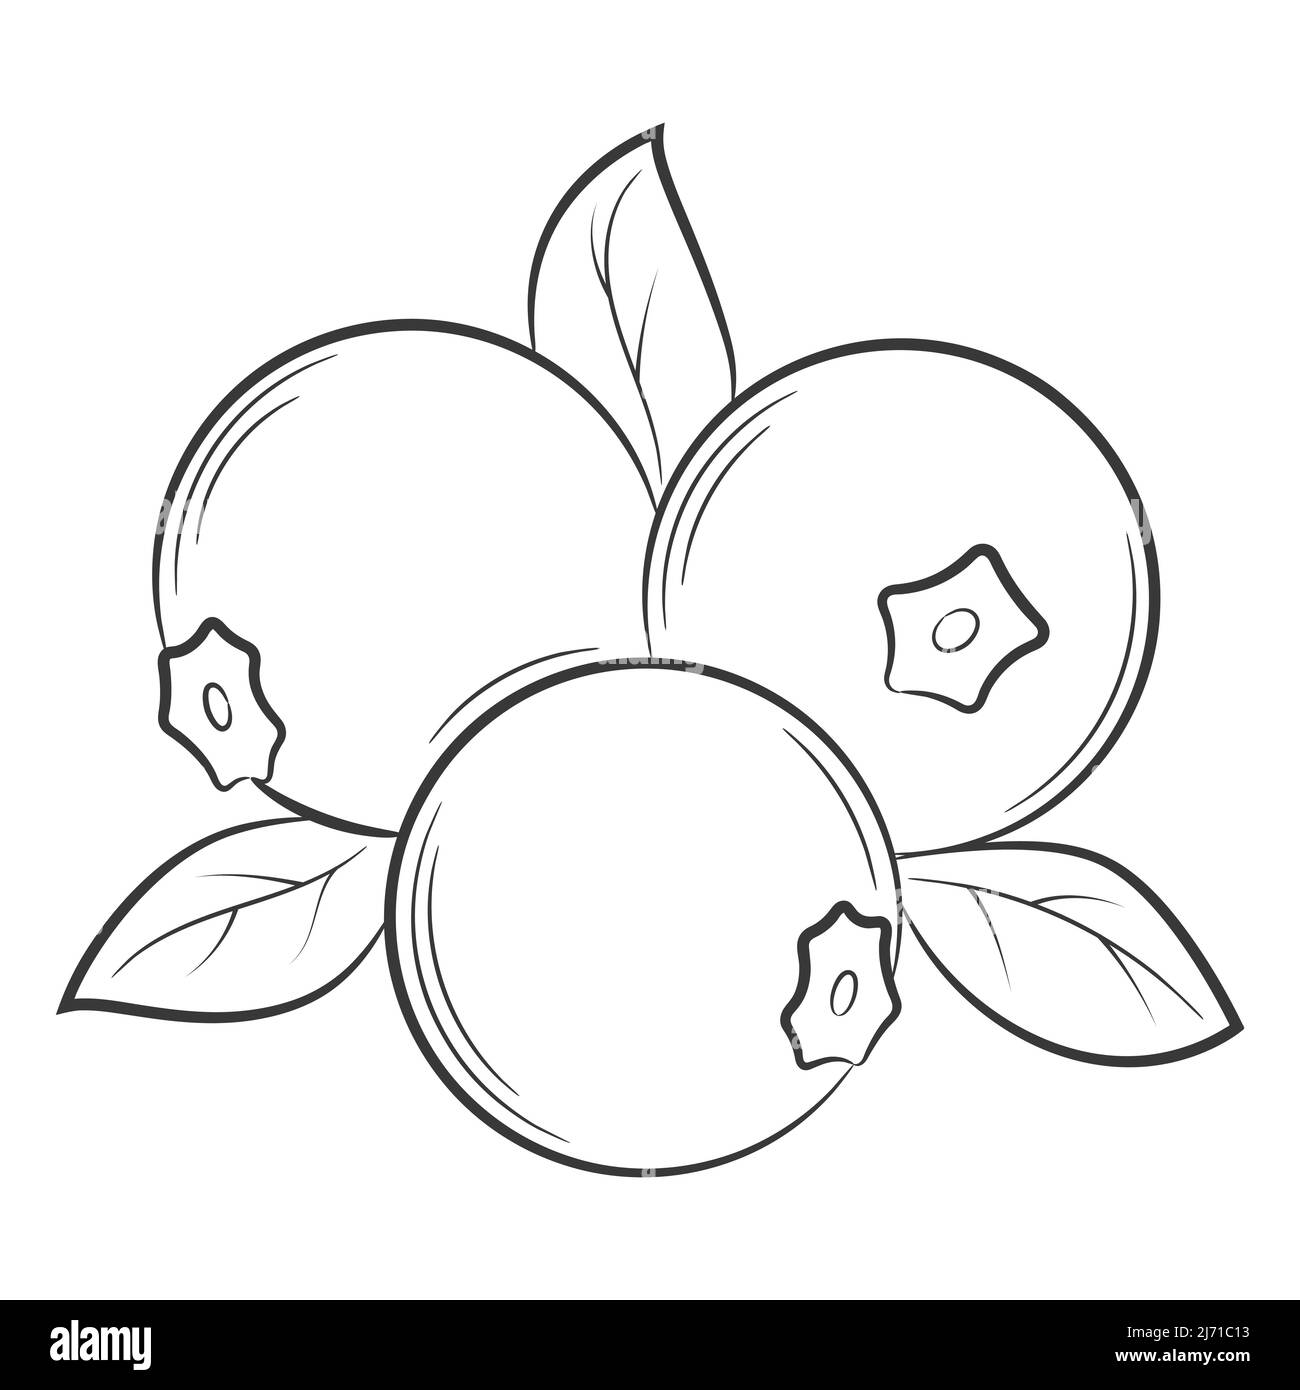 upo vegetable clipart black and white sun